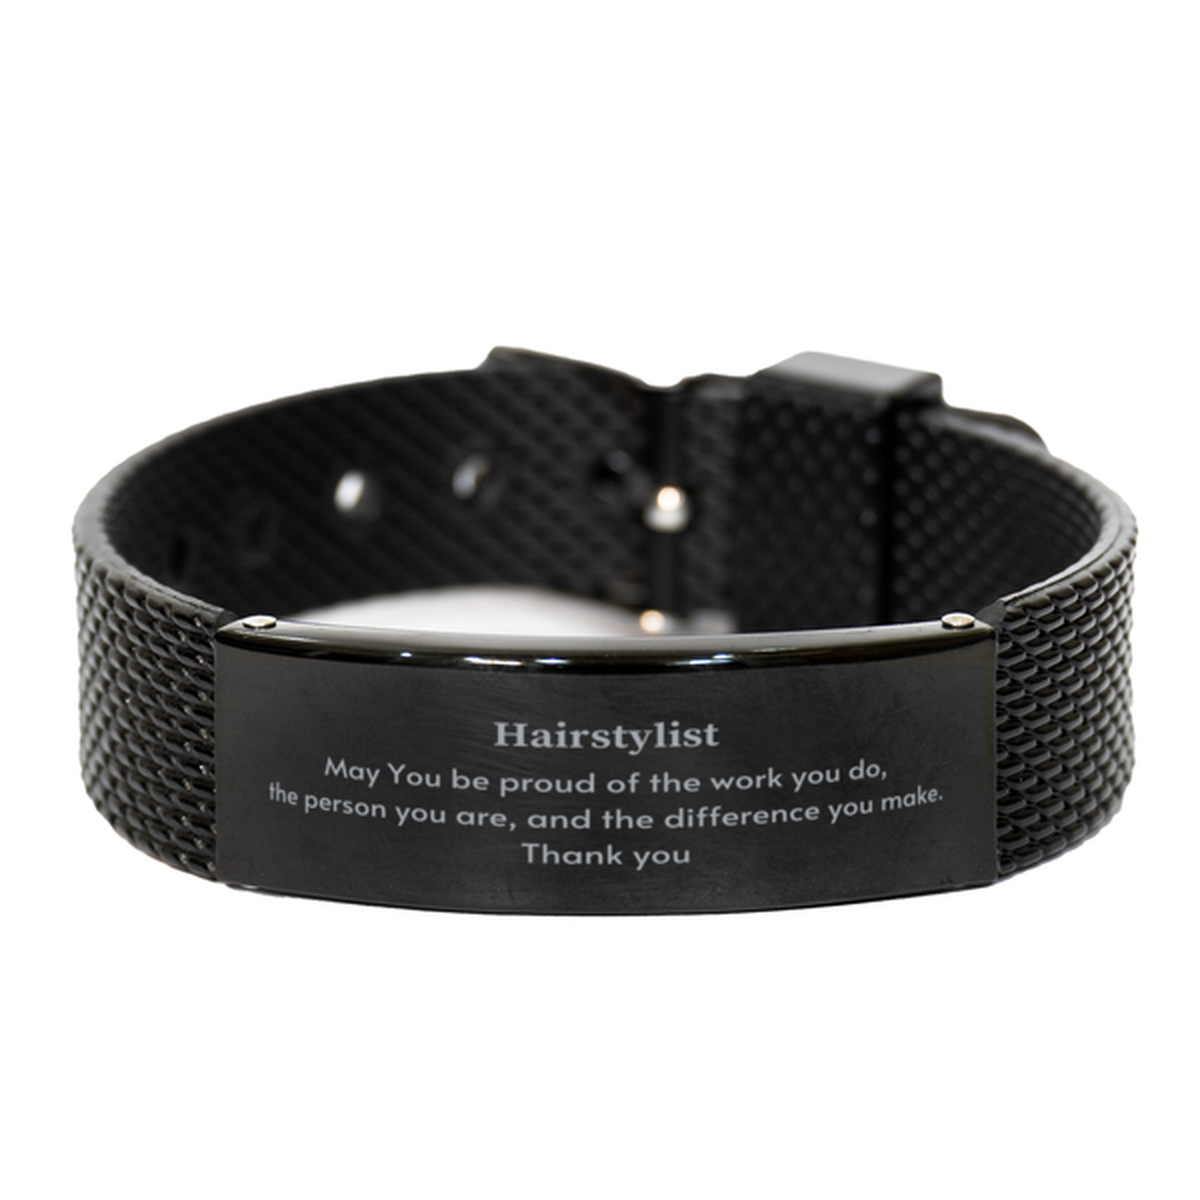 Heartwarming Black Shark Mesh Bracelet Retirement Coworkers Gifts for Hairstylist, Hairstylist May You be proud of the work you do, the person you are Gifts for Boss Men Women Friends